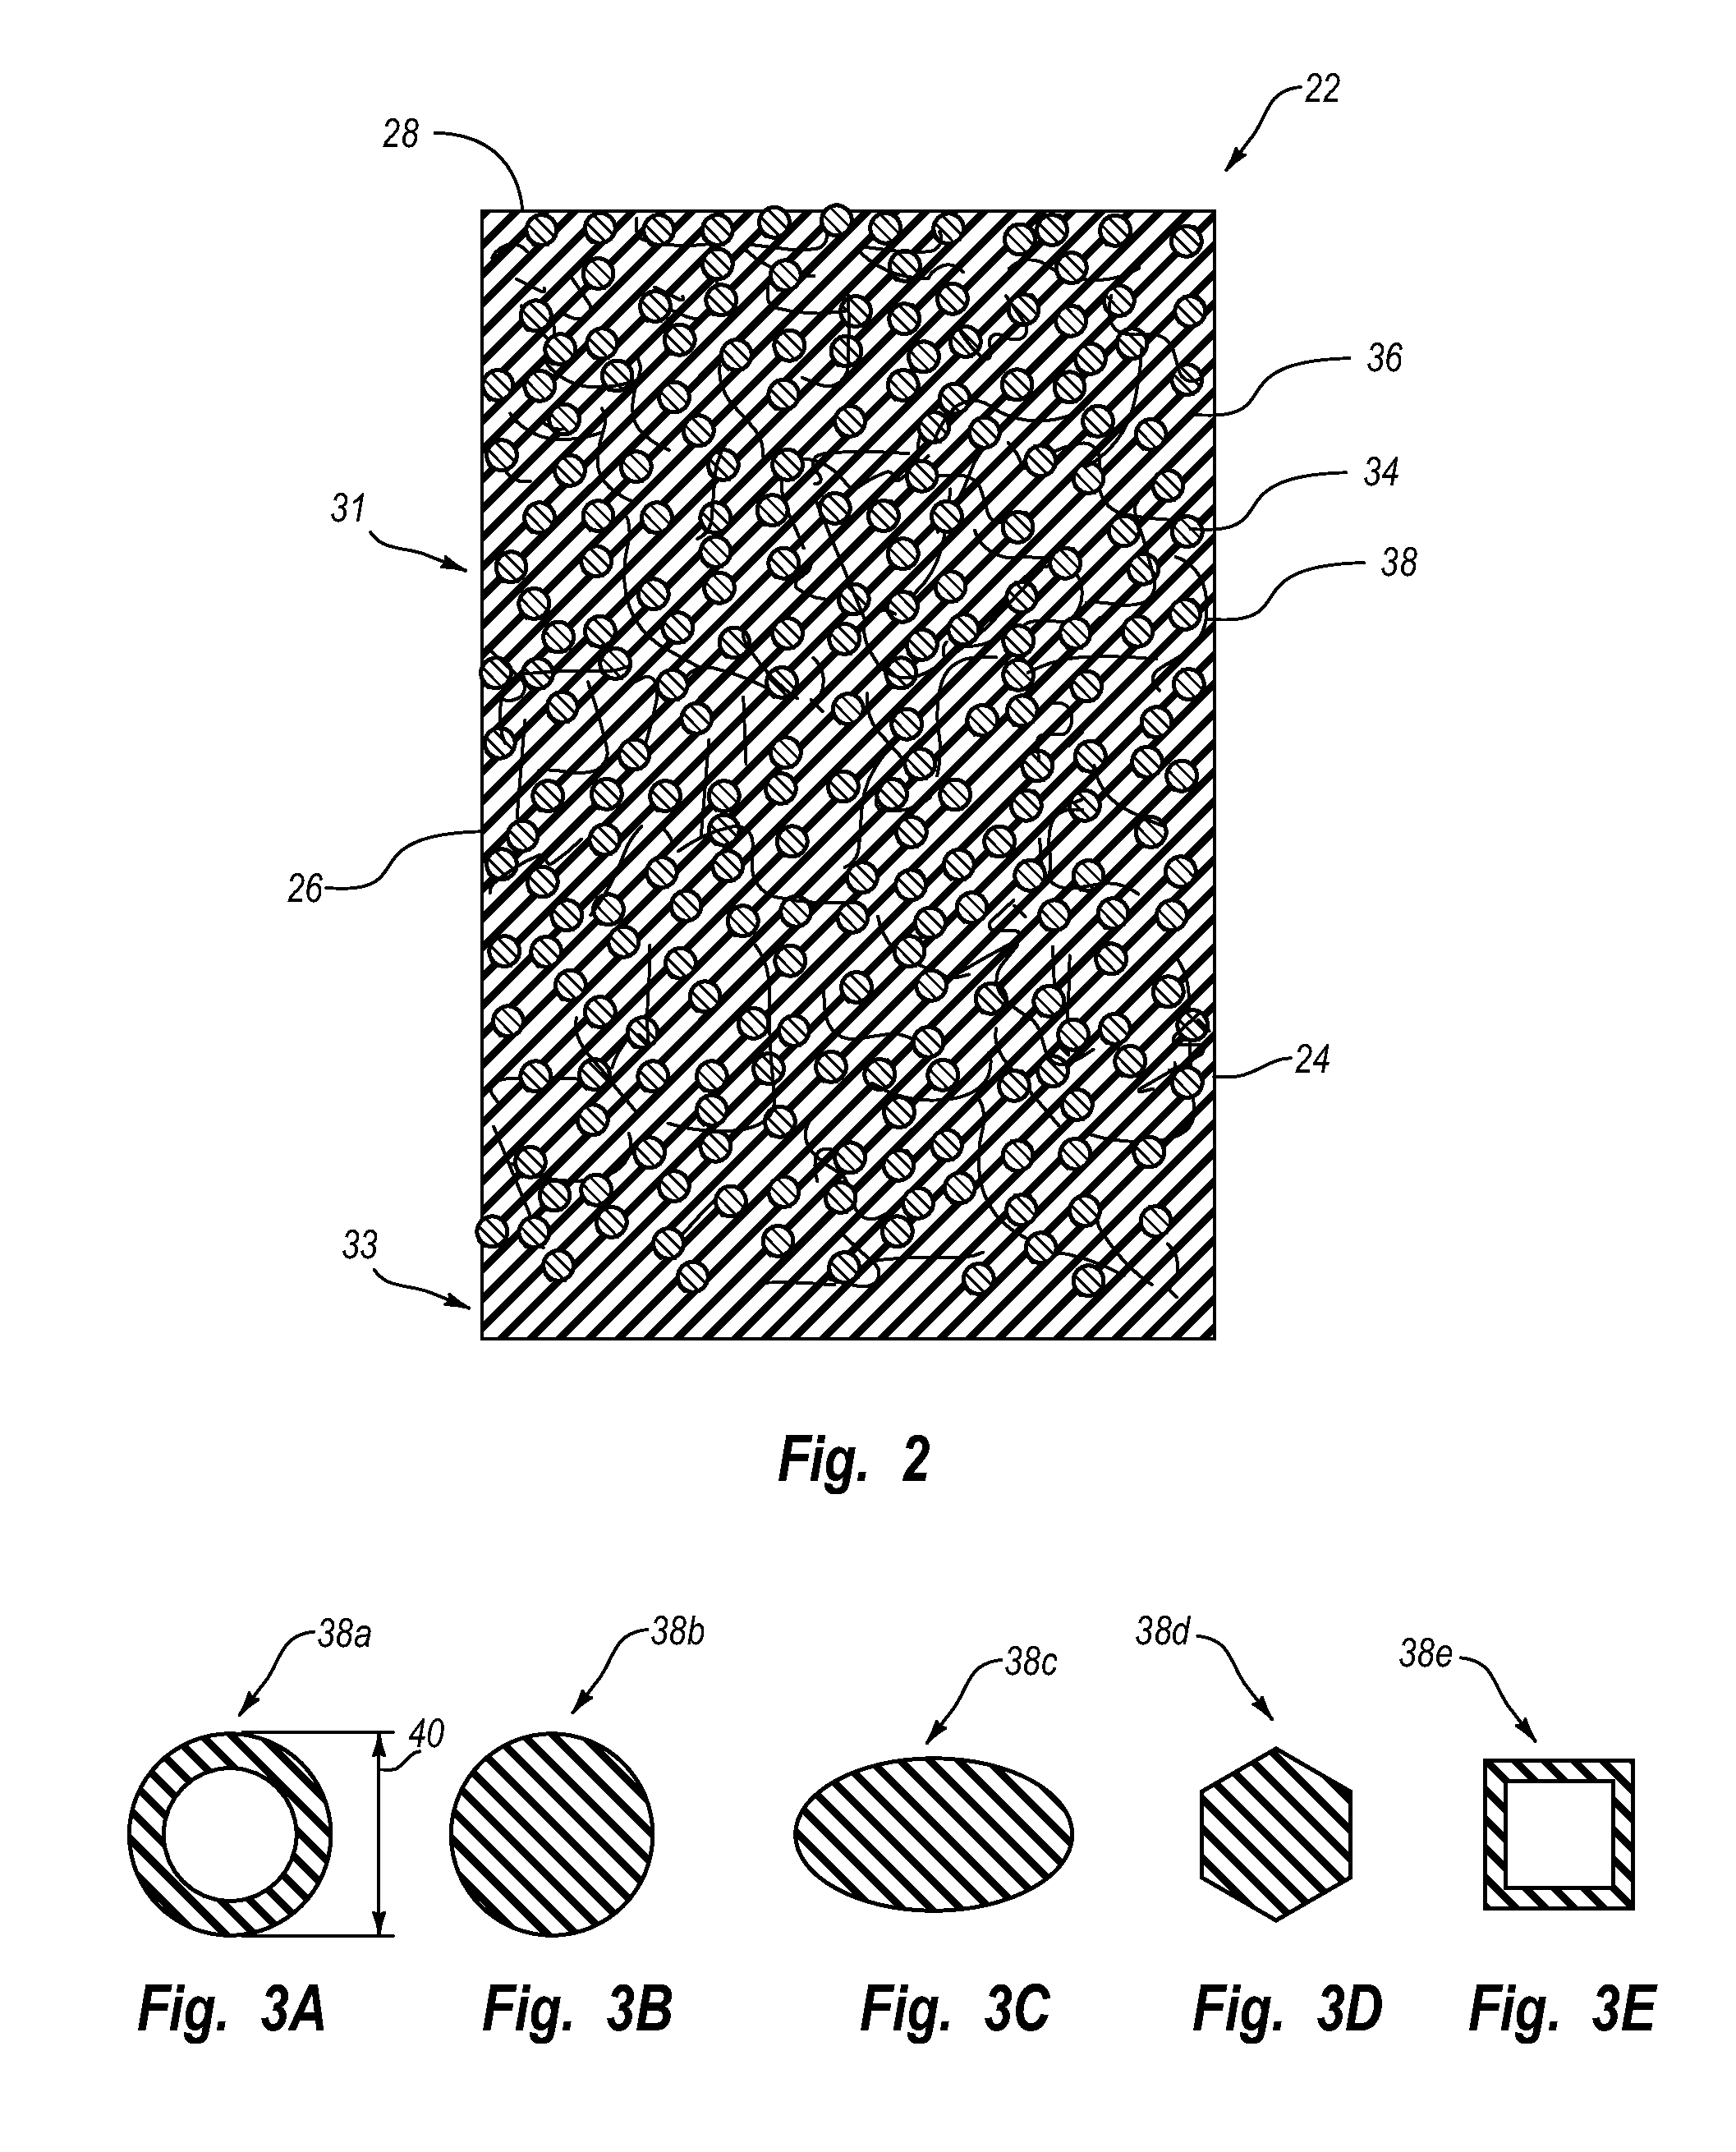 Impregnated drilling tools including elongated structures